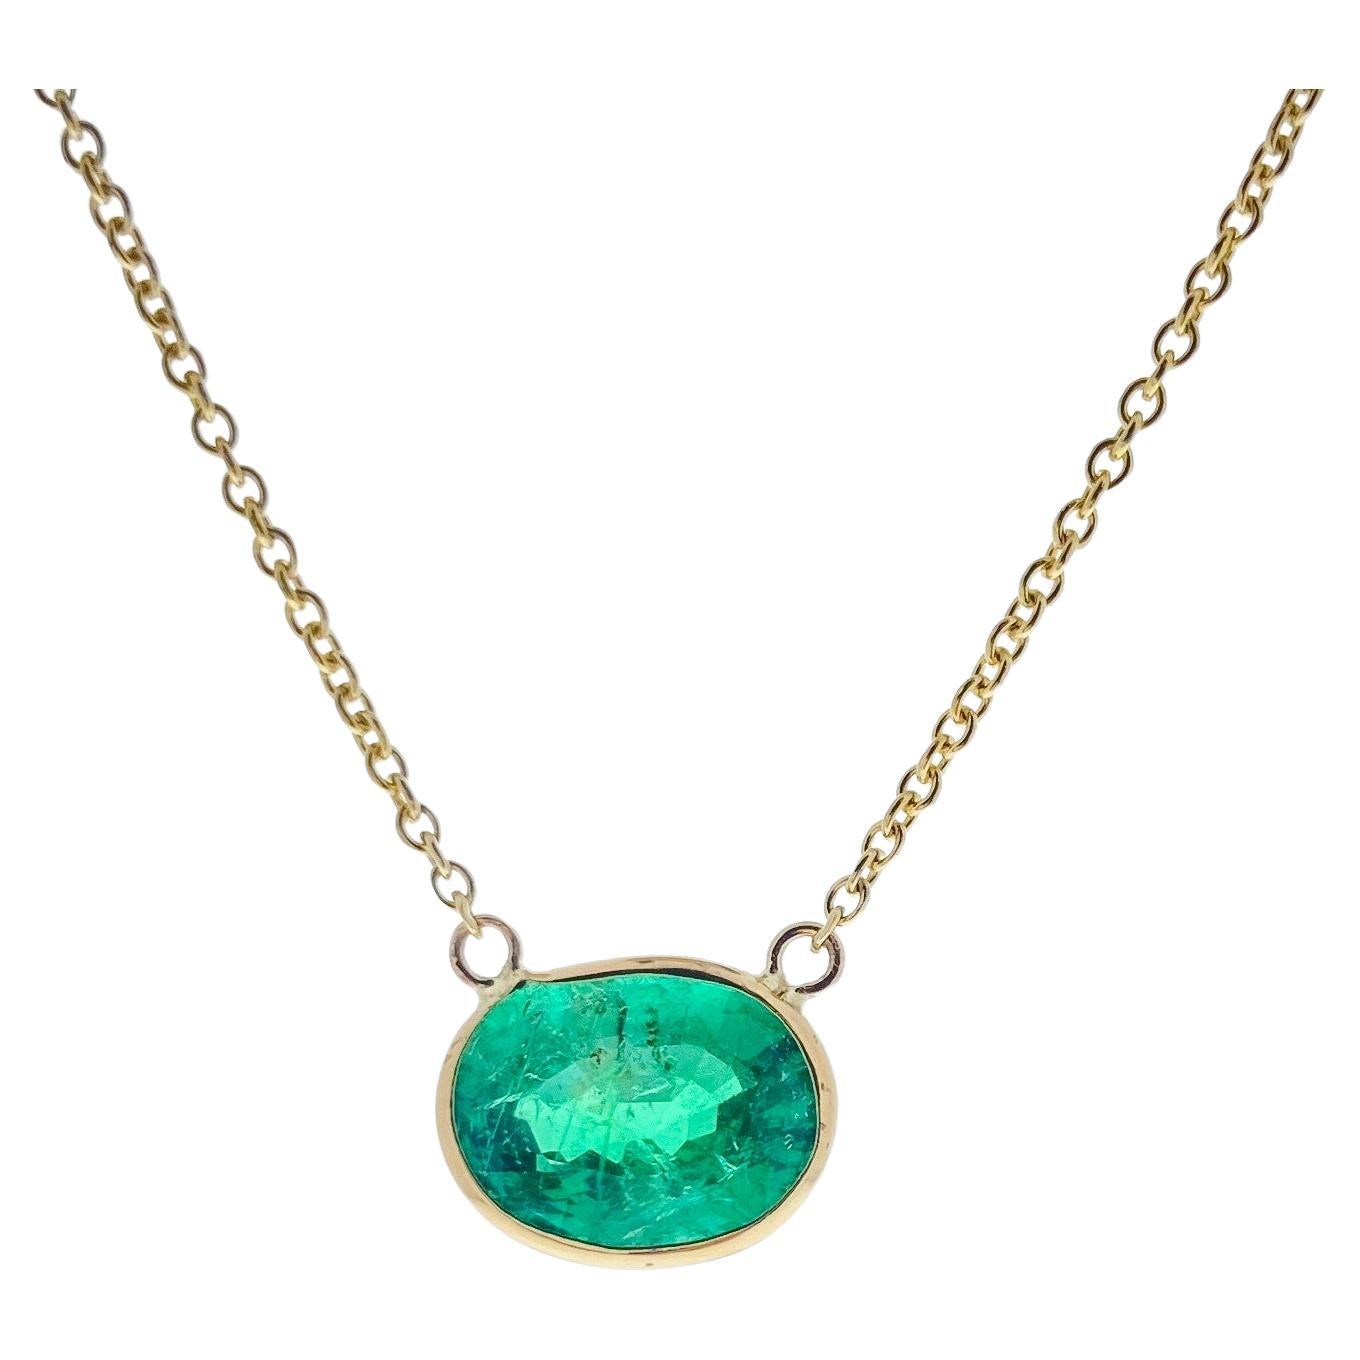 1.96 Carat Green Emerald Oval Cut Fashion Necklaces In 14K Yellow Gold For Sale